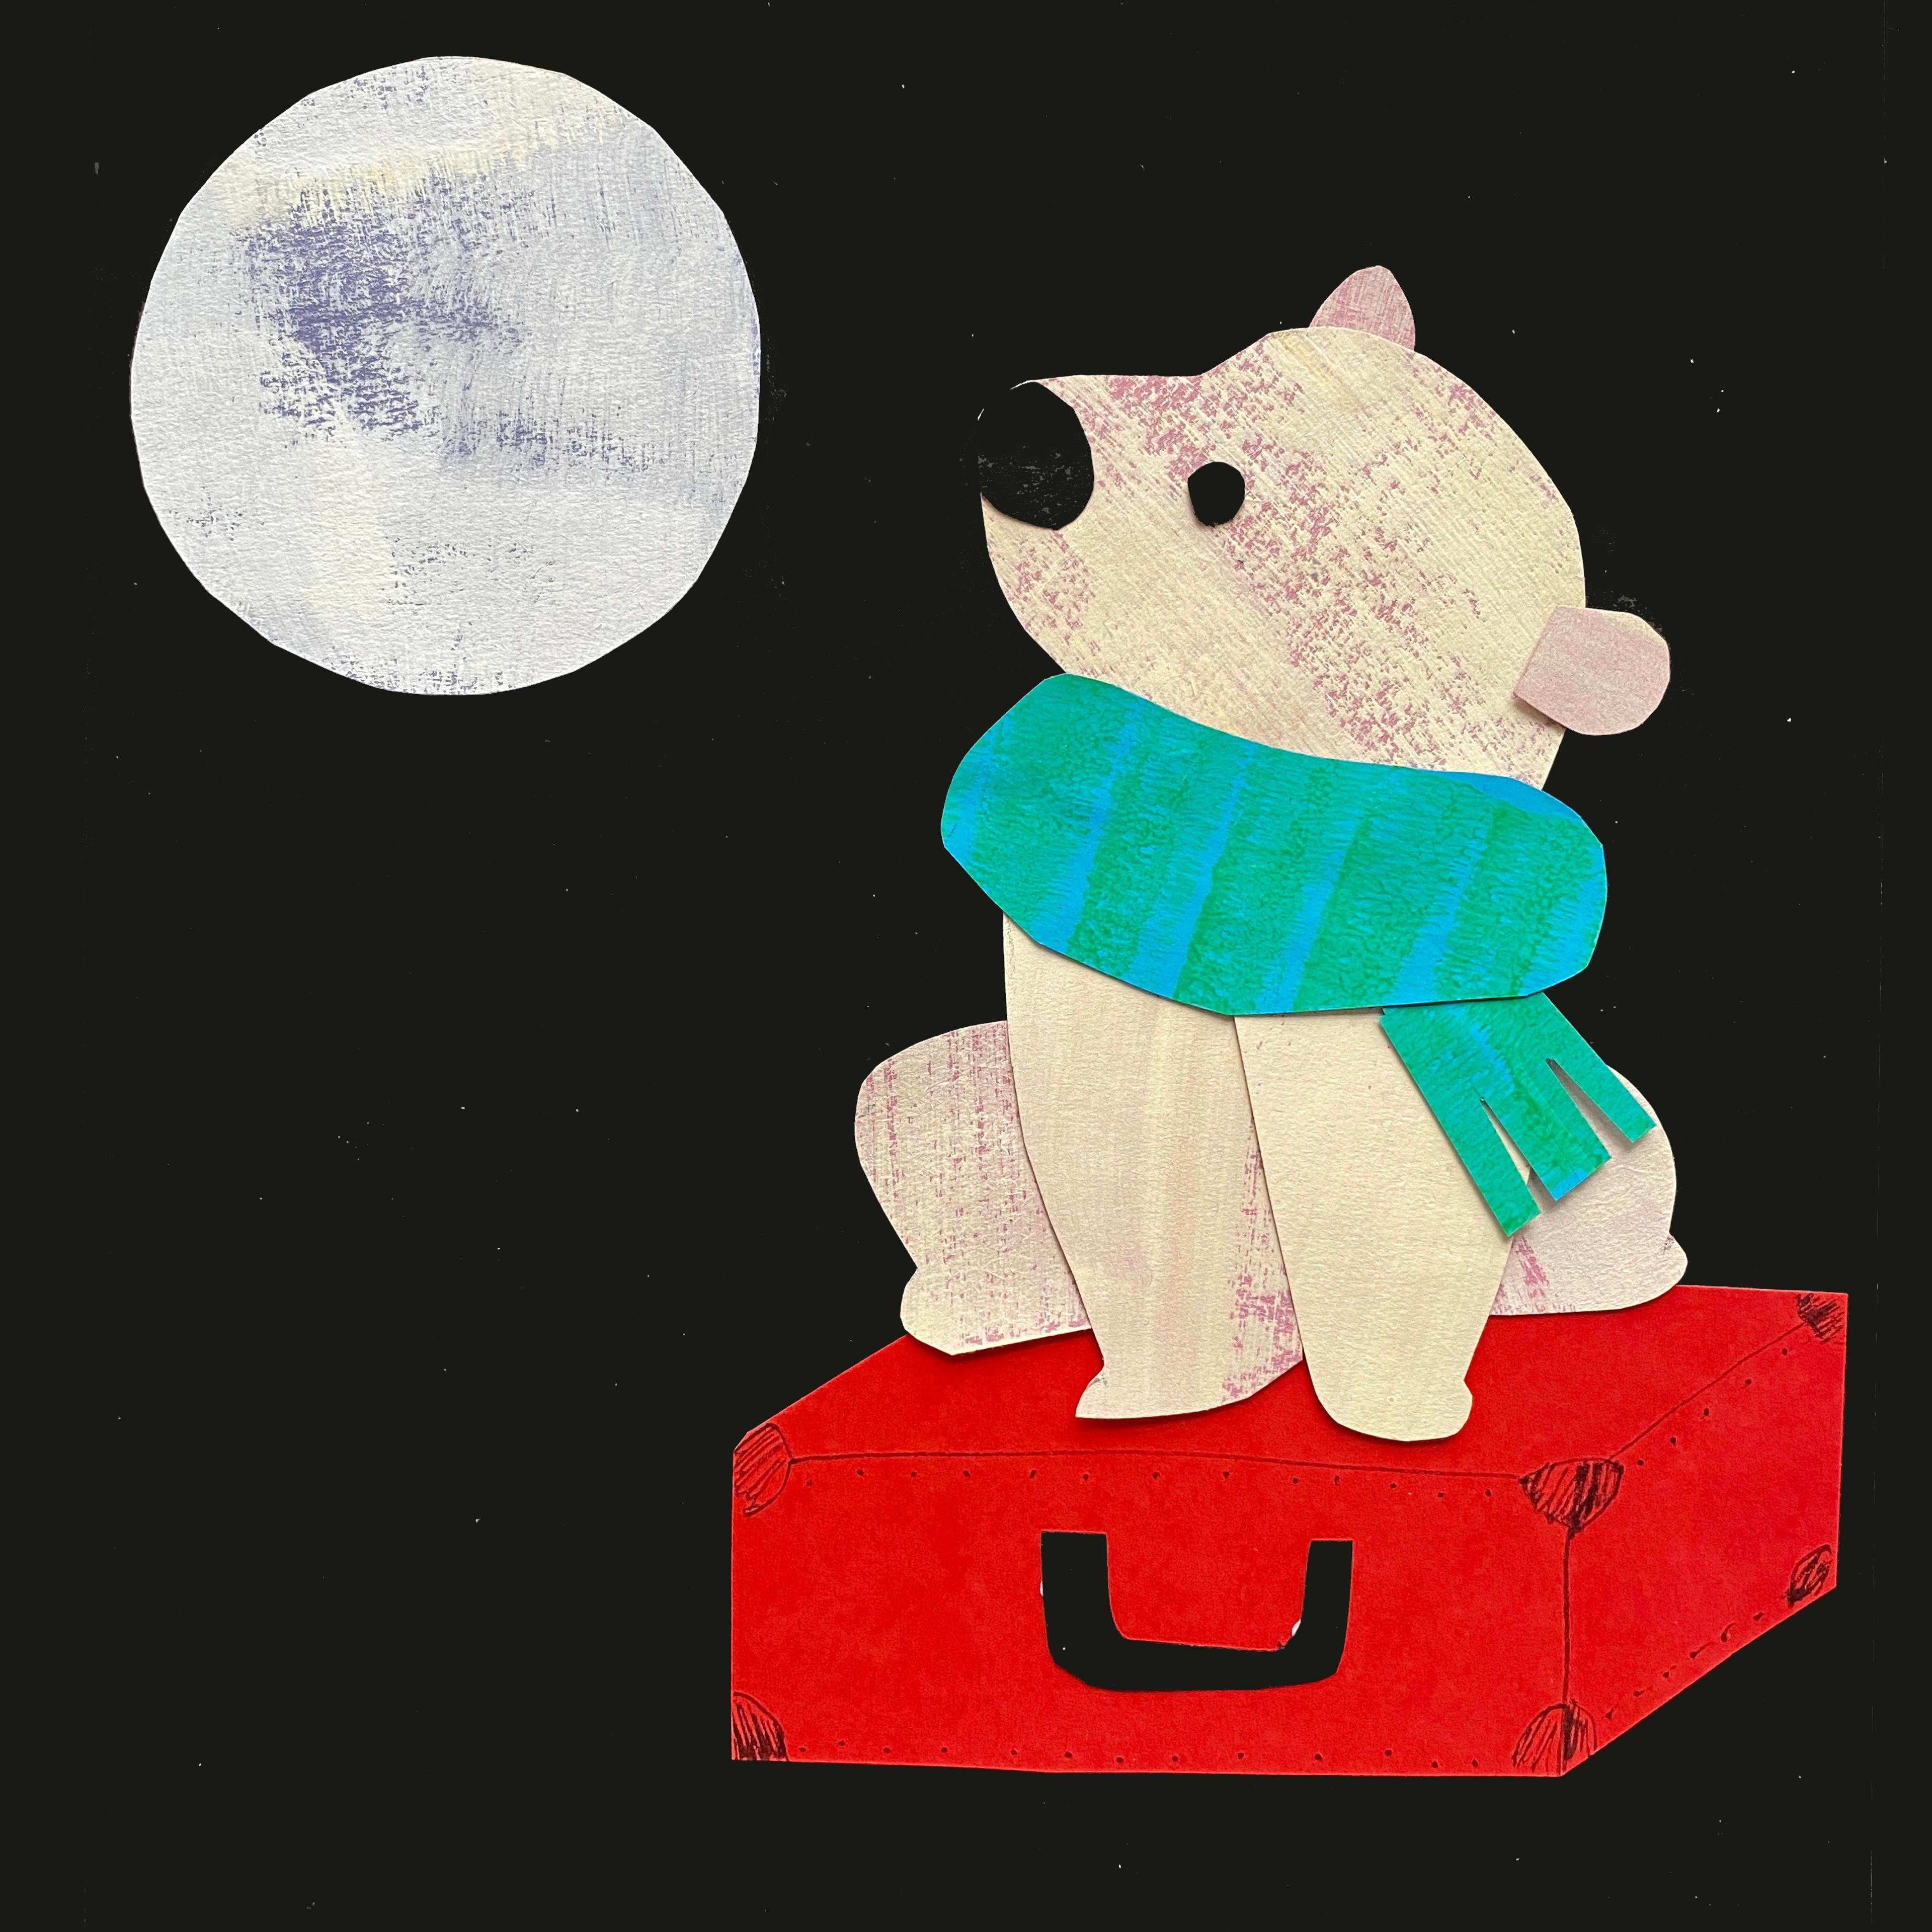 Collage of a bear wearing a scarf looking at the full moon.